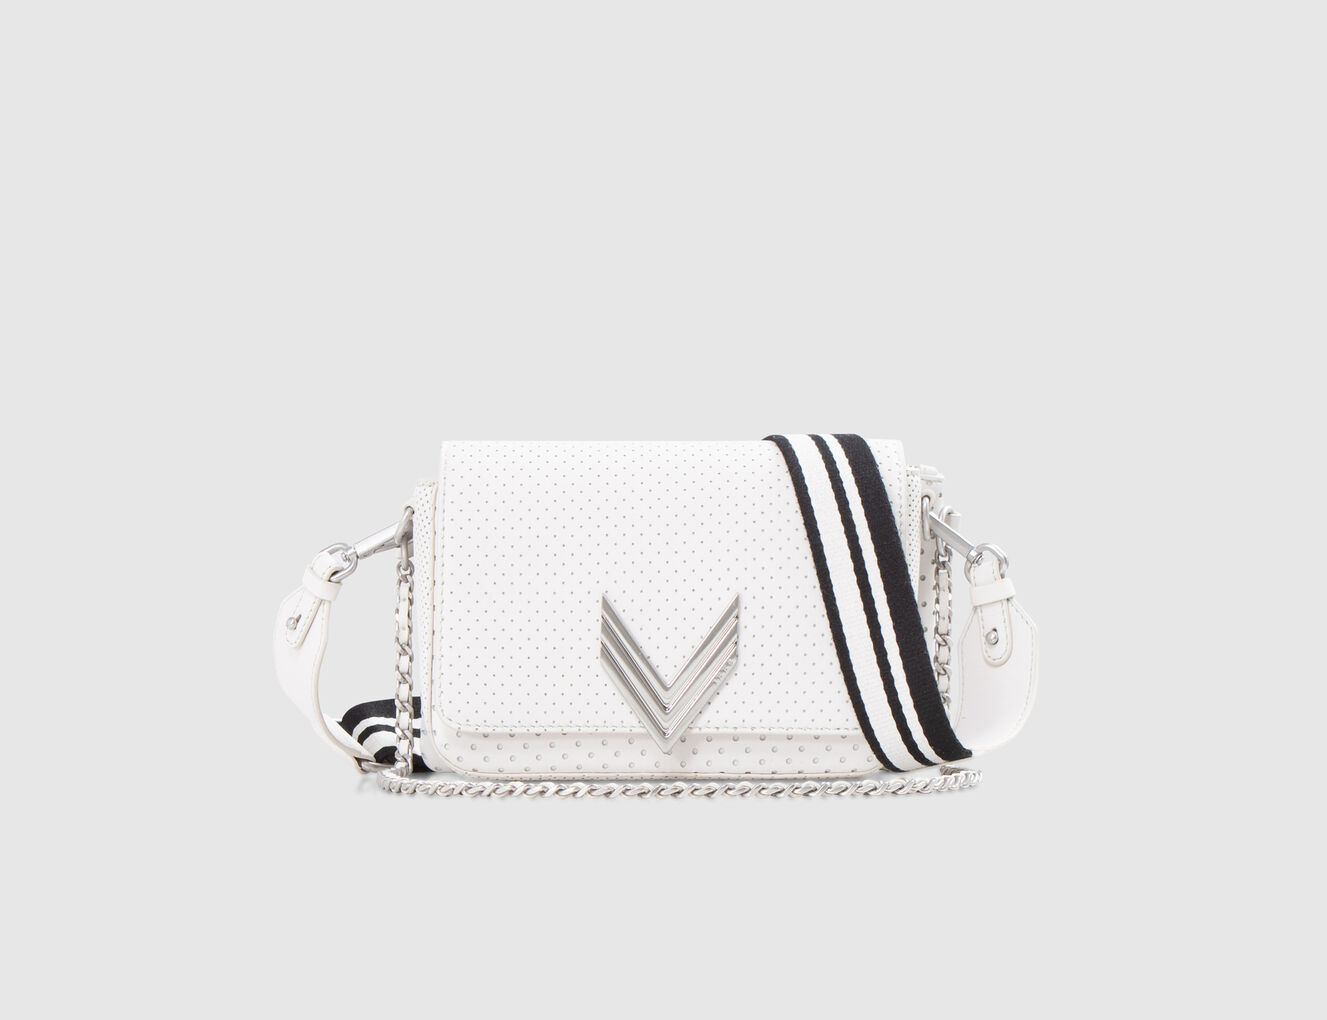 The 111 KINGSTON Women's white perforated leather bag - IKKS-1